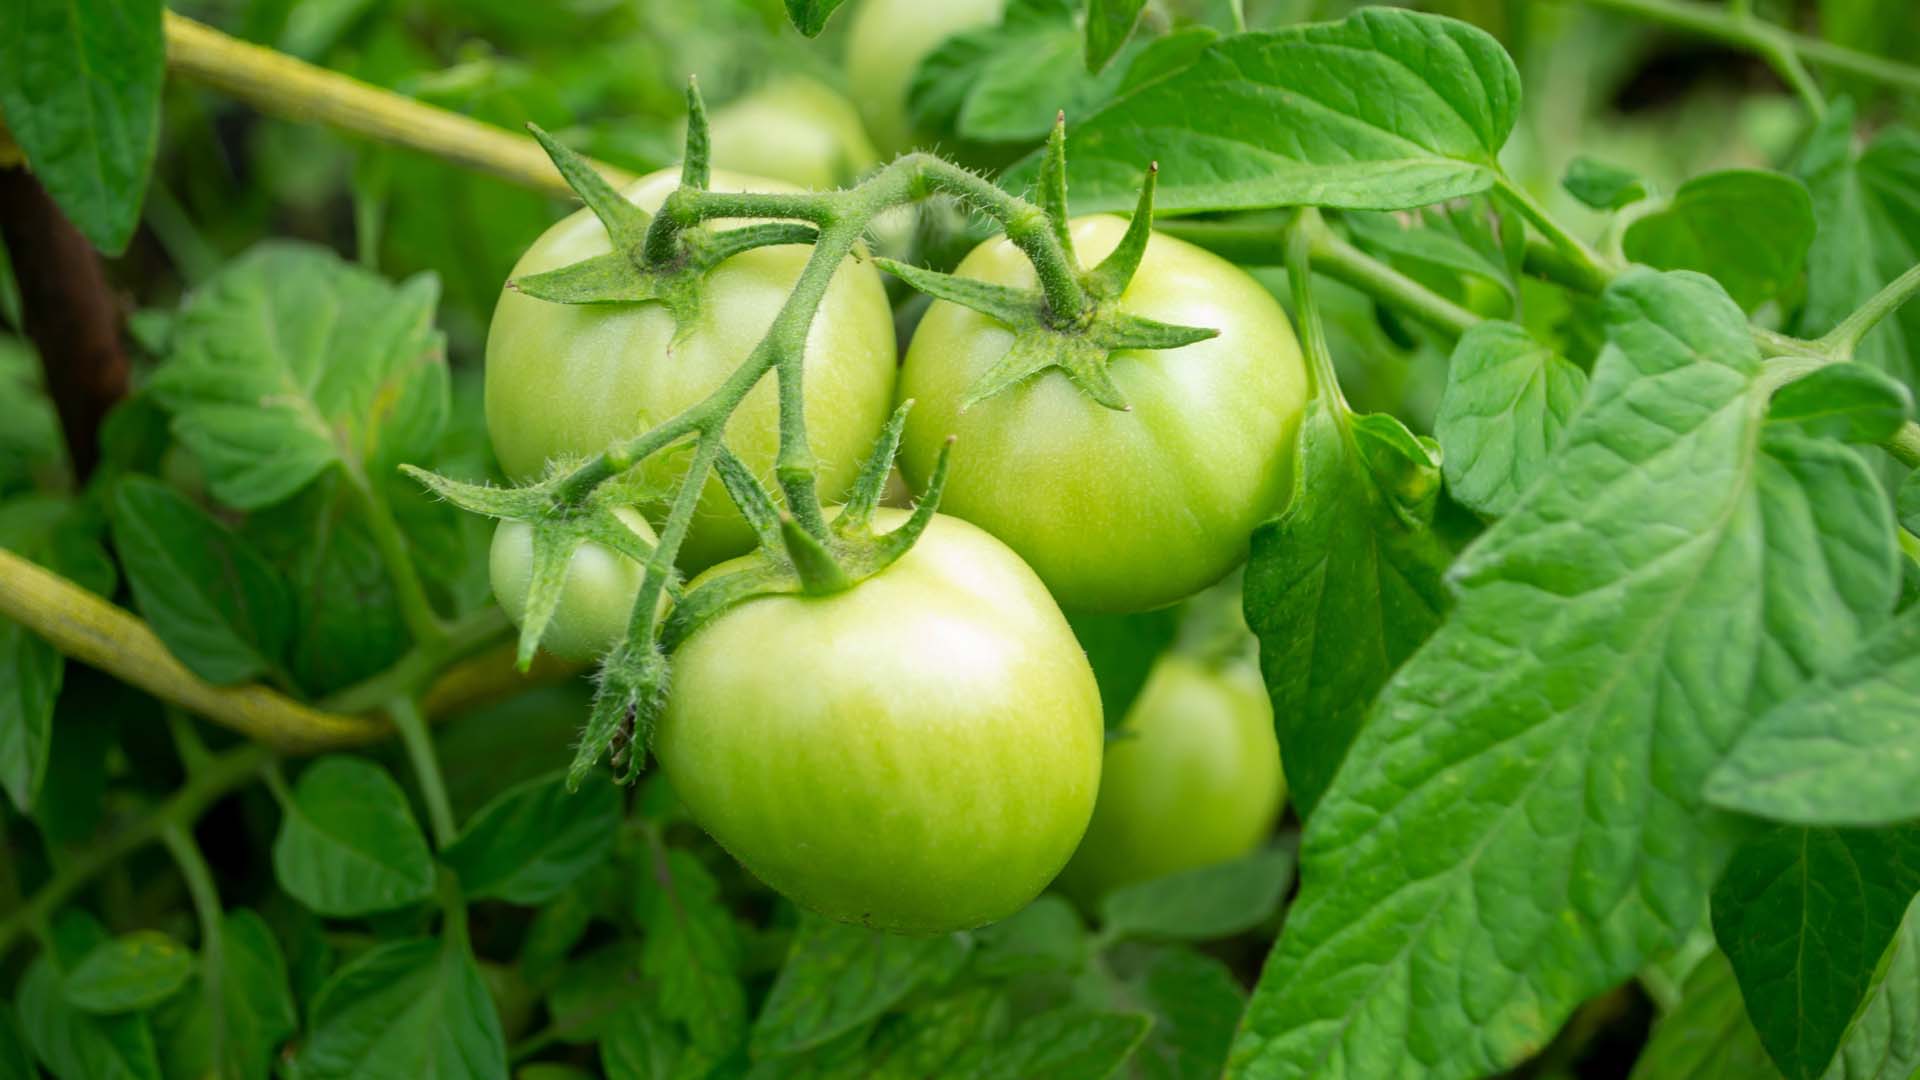 Green tomatoes need warmth for them to ripen towards the end of the season